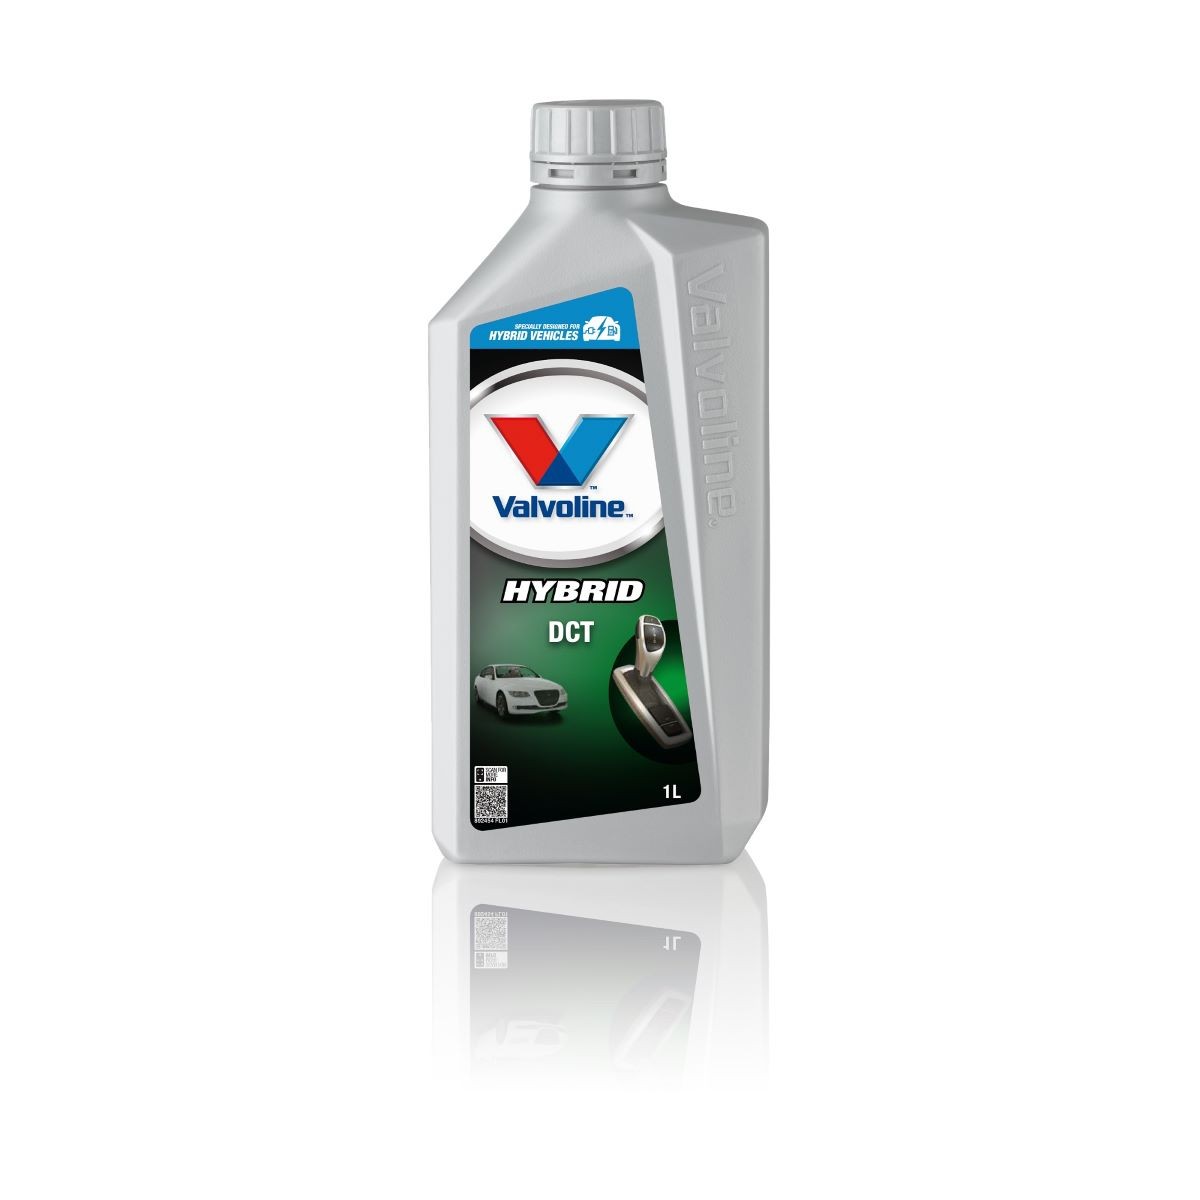 892454 Valvoline Gearbox oil FORD USA ATF DCT, 1l